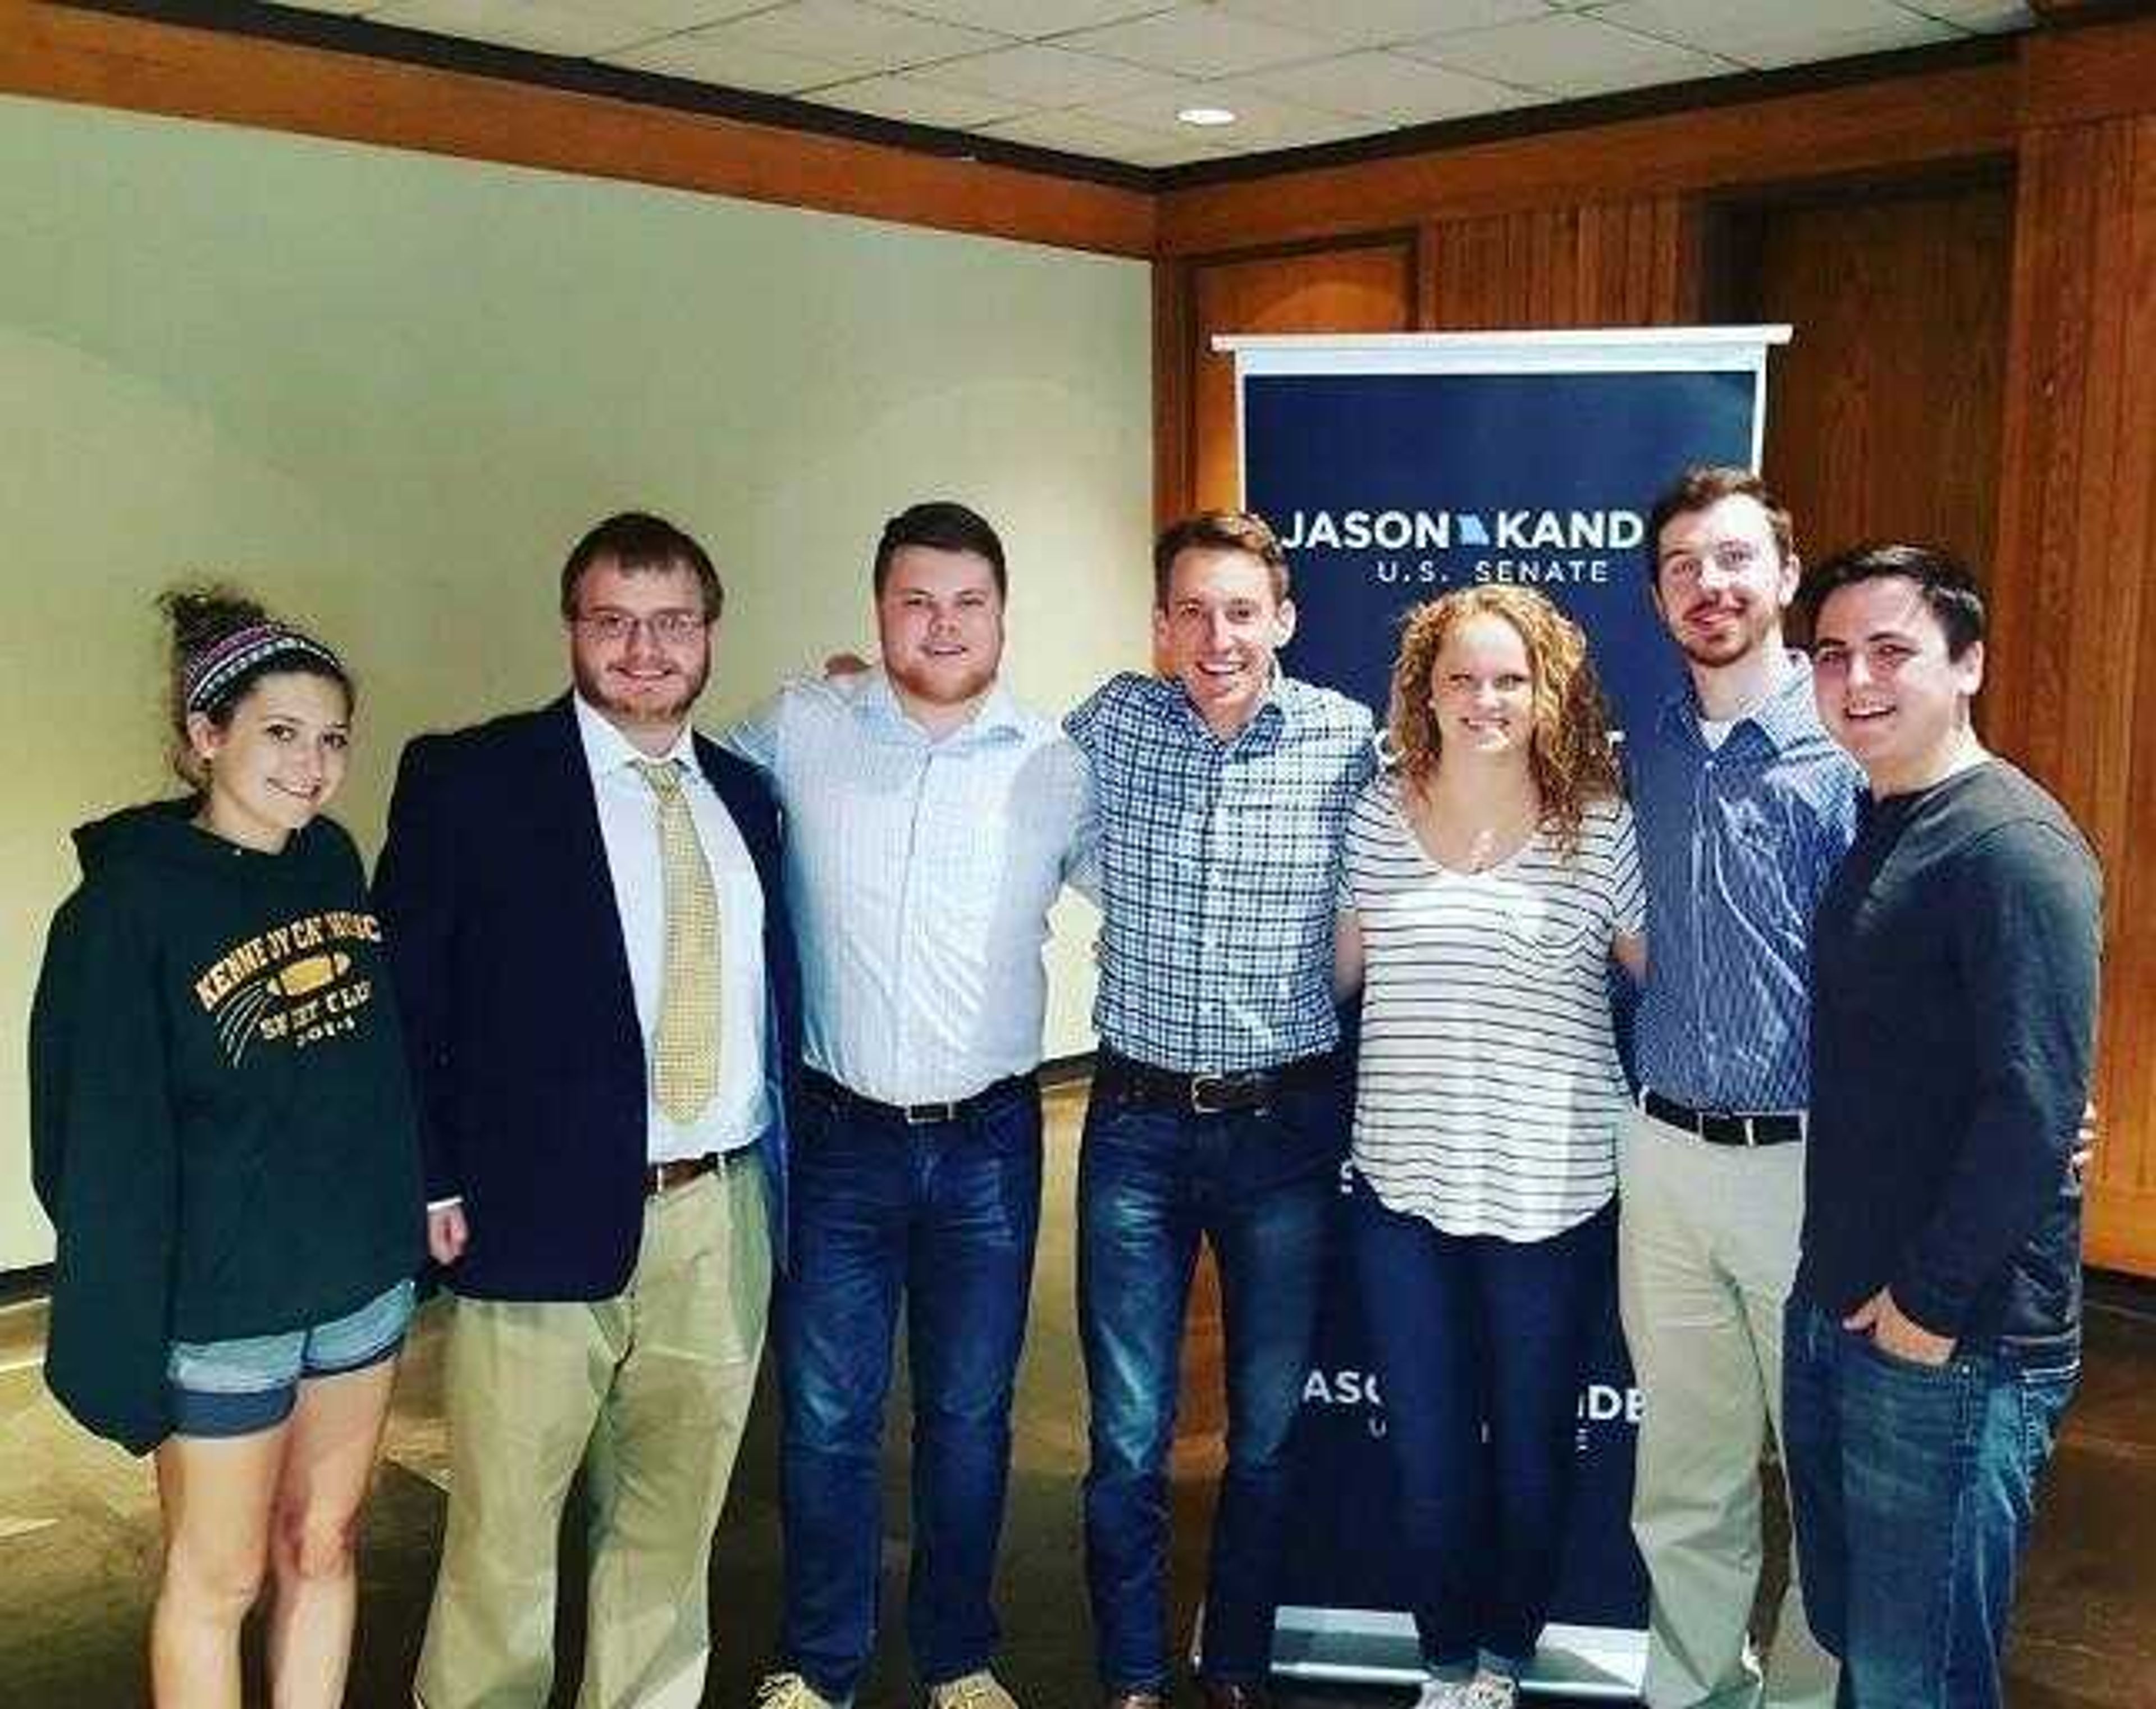 Members of the College Democrats pose for a group photo after hearing Jason Kander speak in October.